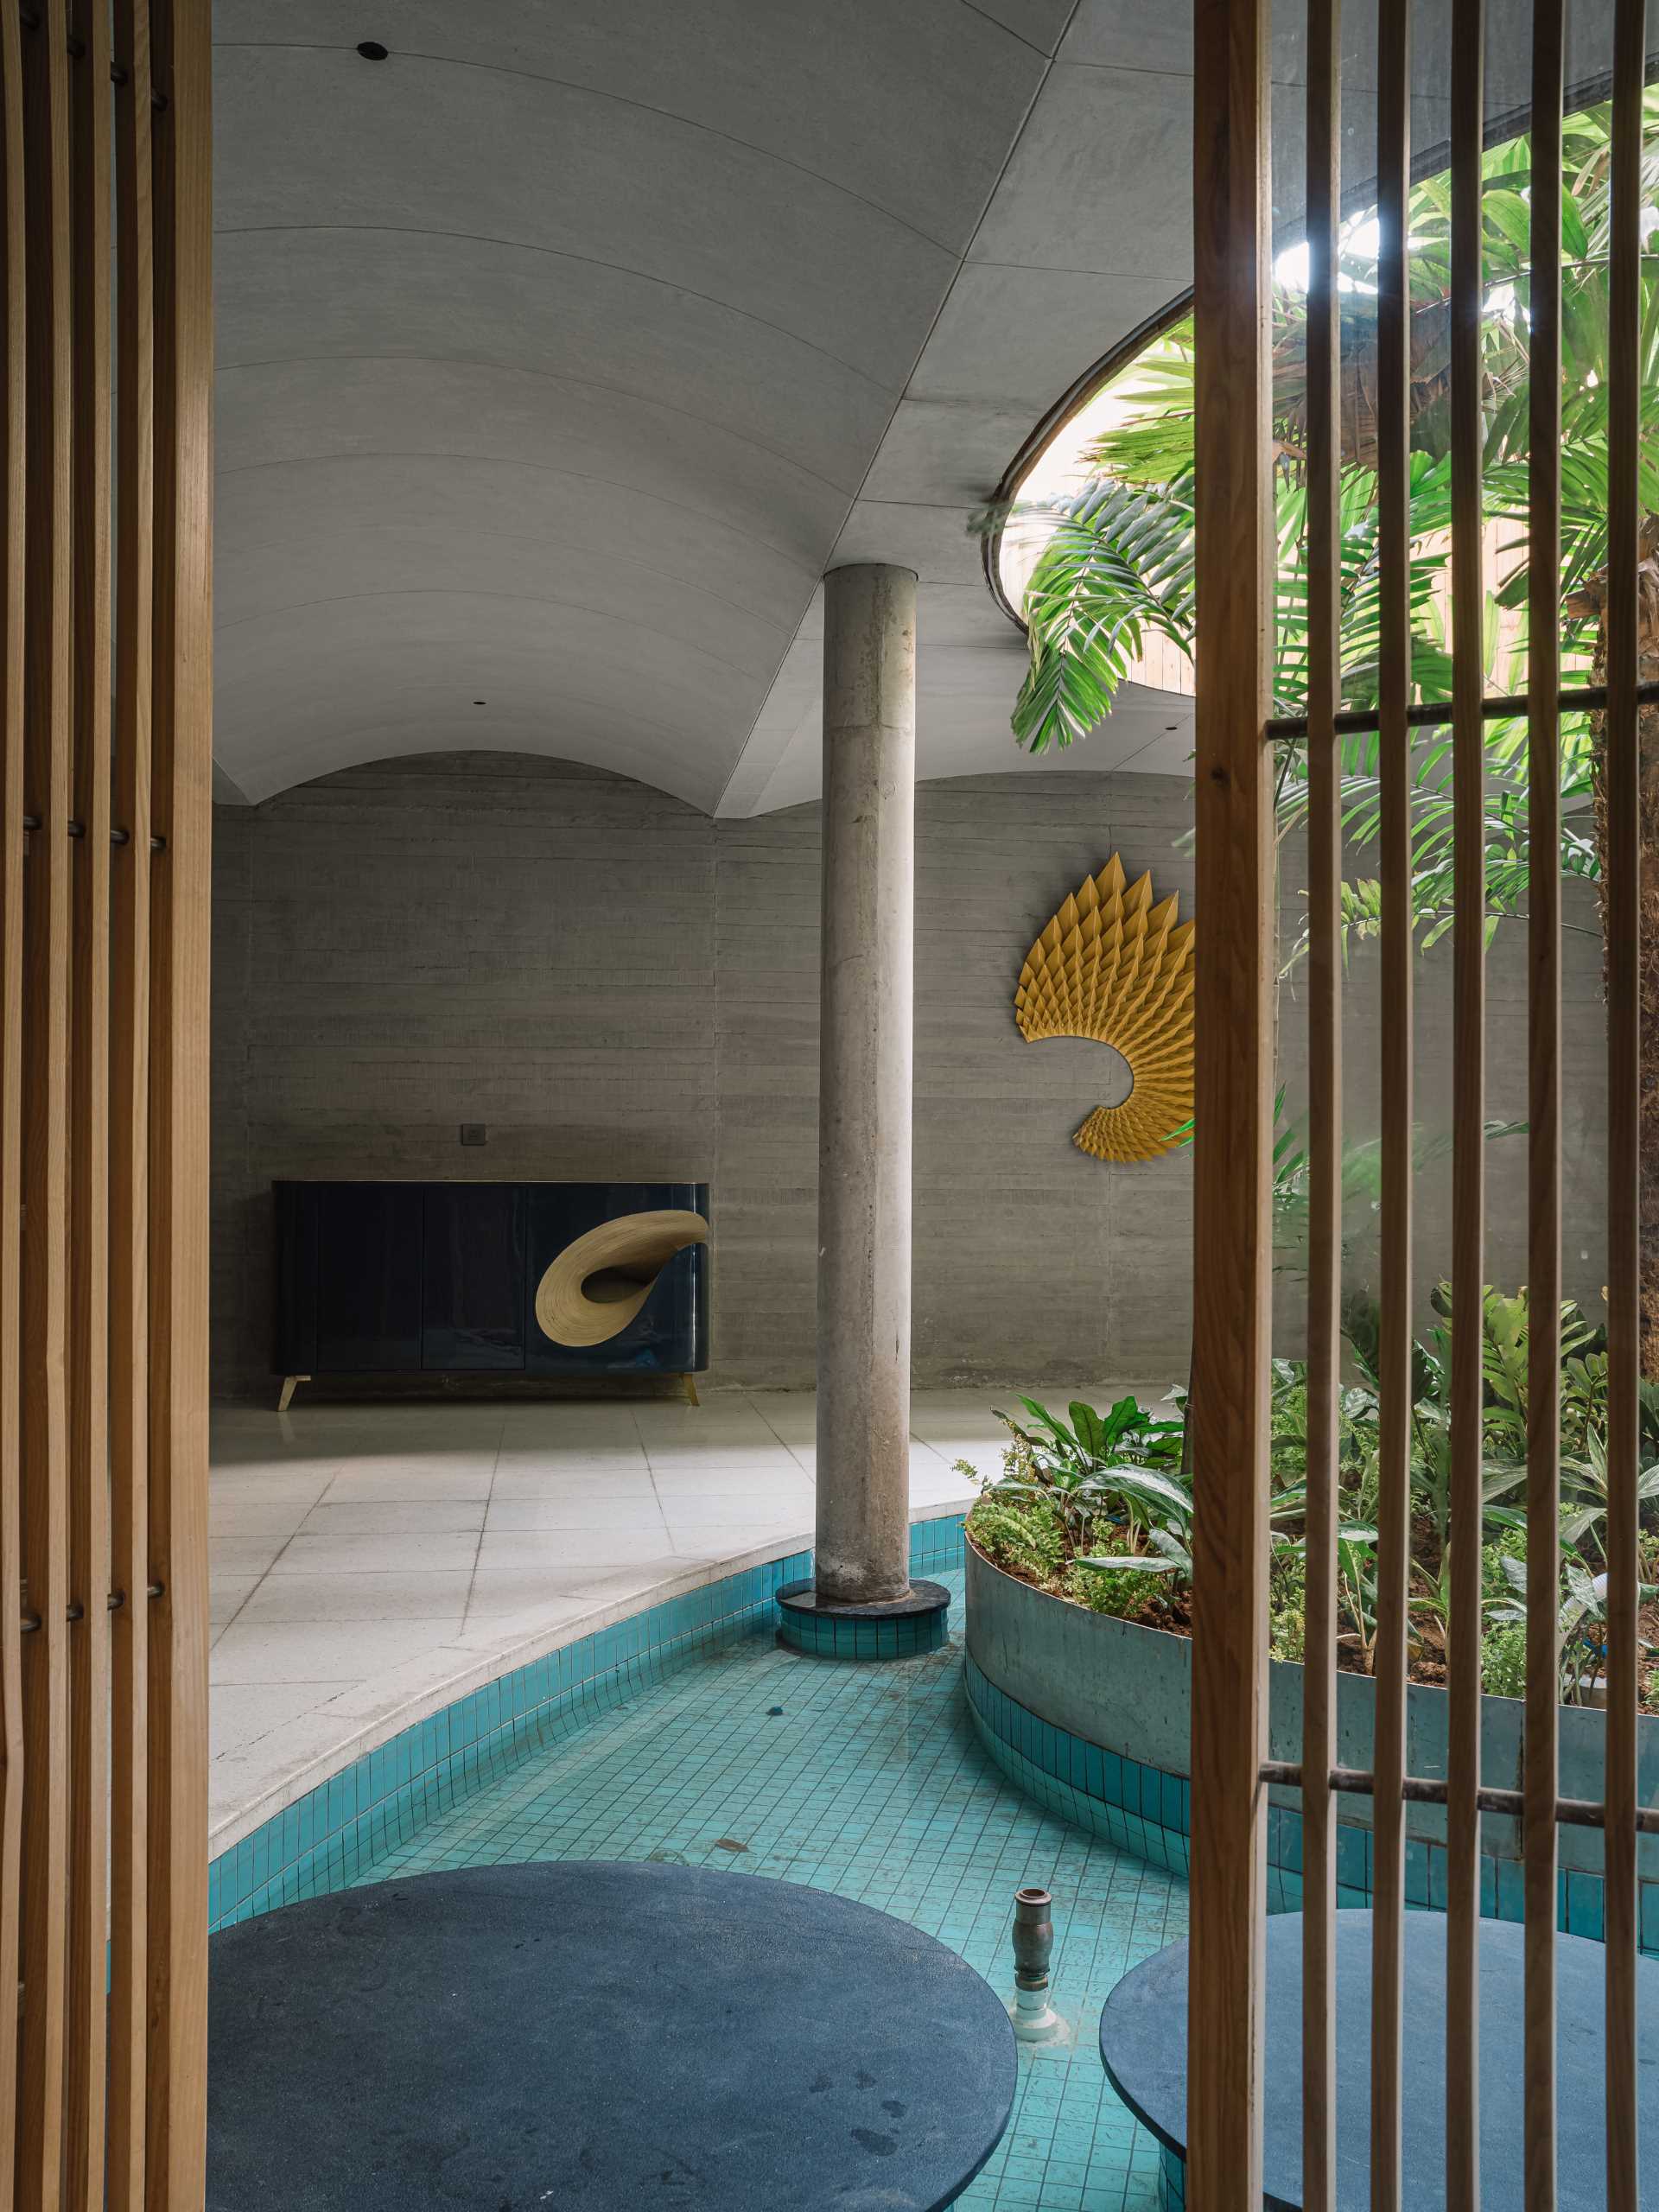 A quiet area of this modern ،me includes a m،age room, a water feature with a garden island, and a sculptural wall.